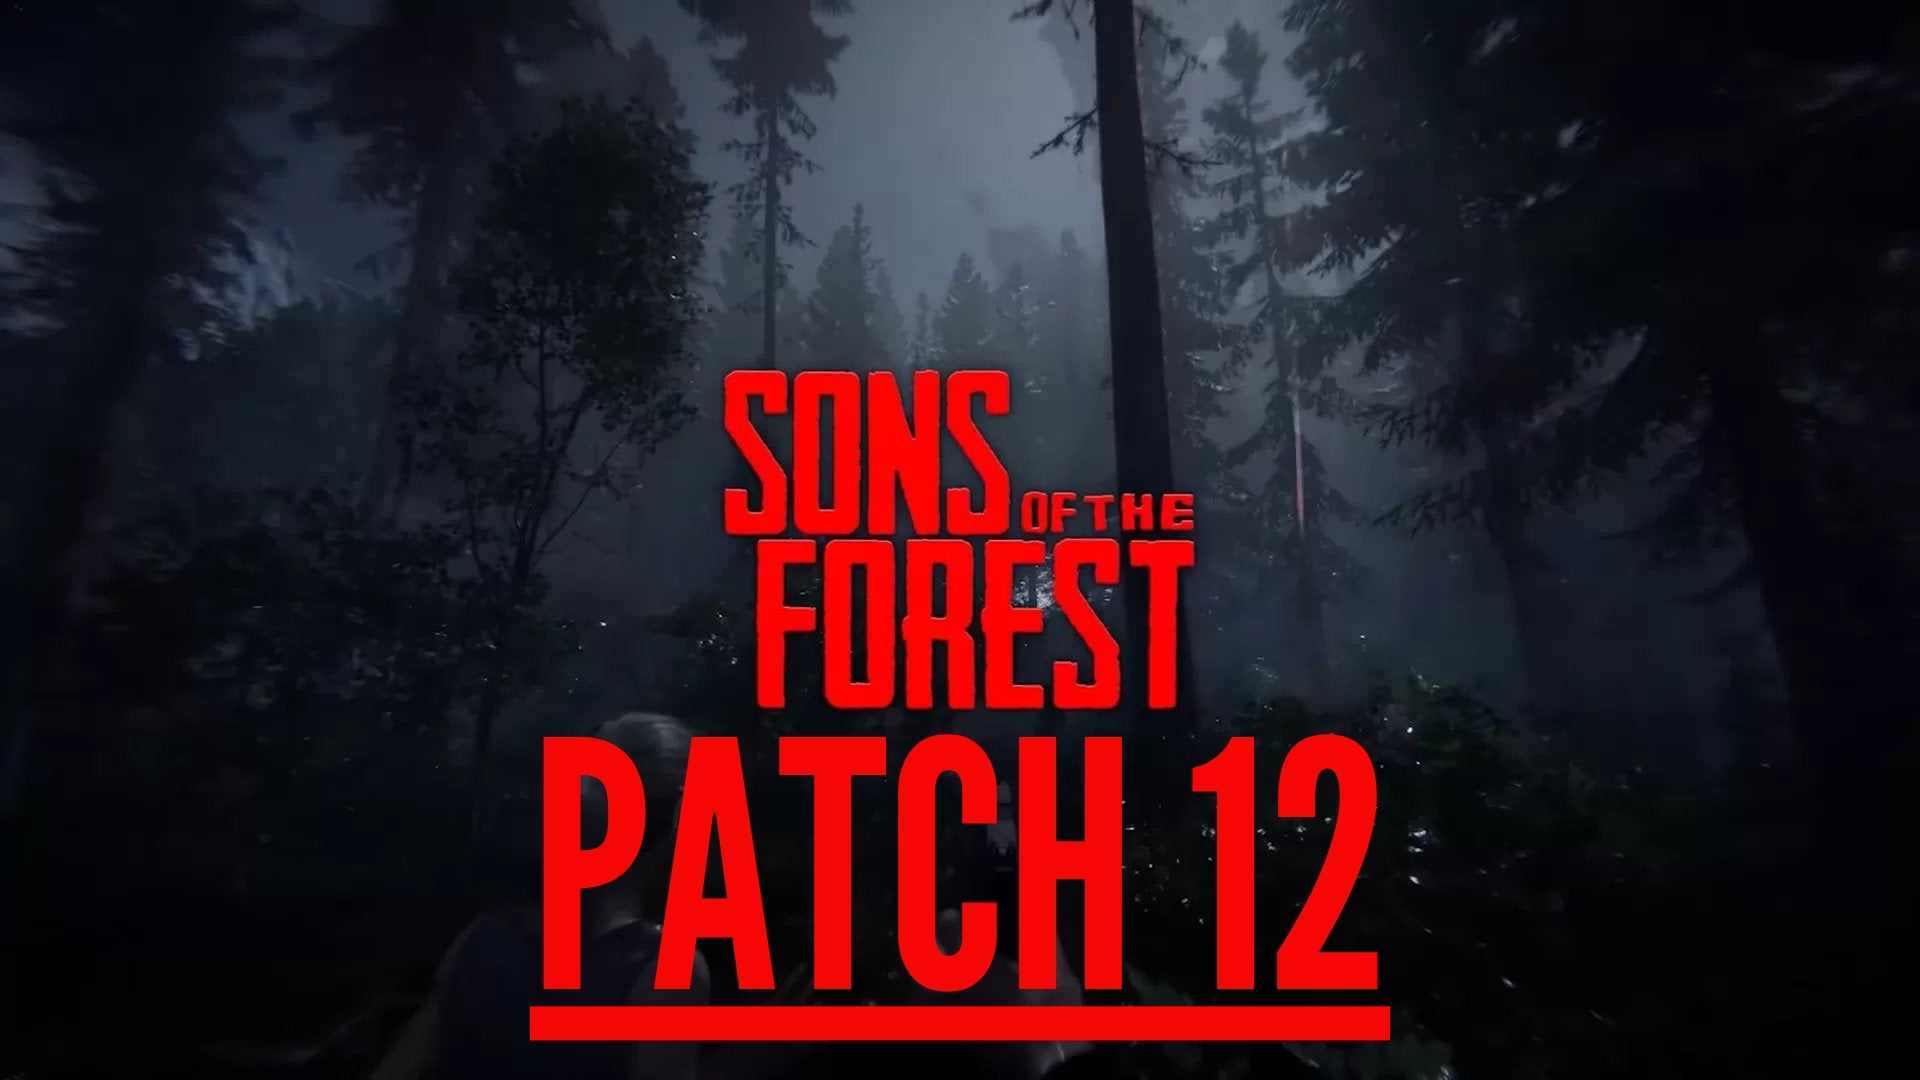 New Crafting Recipe Location - Cross Light - Sons of the Forest Patch 12 